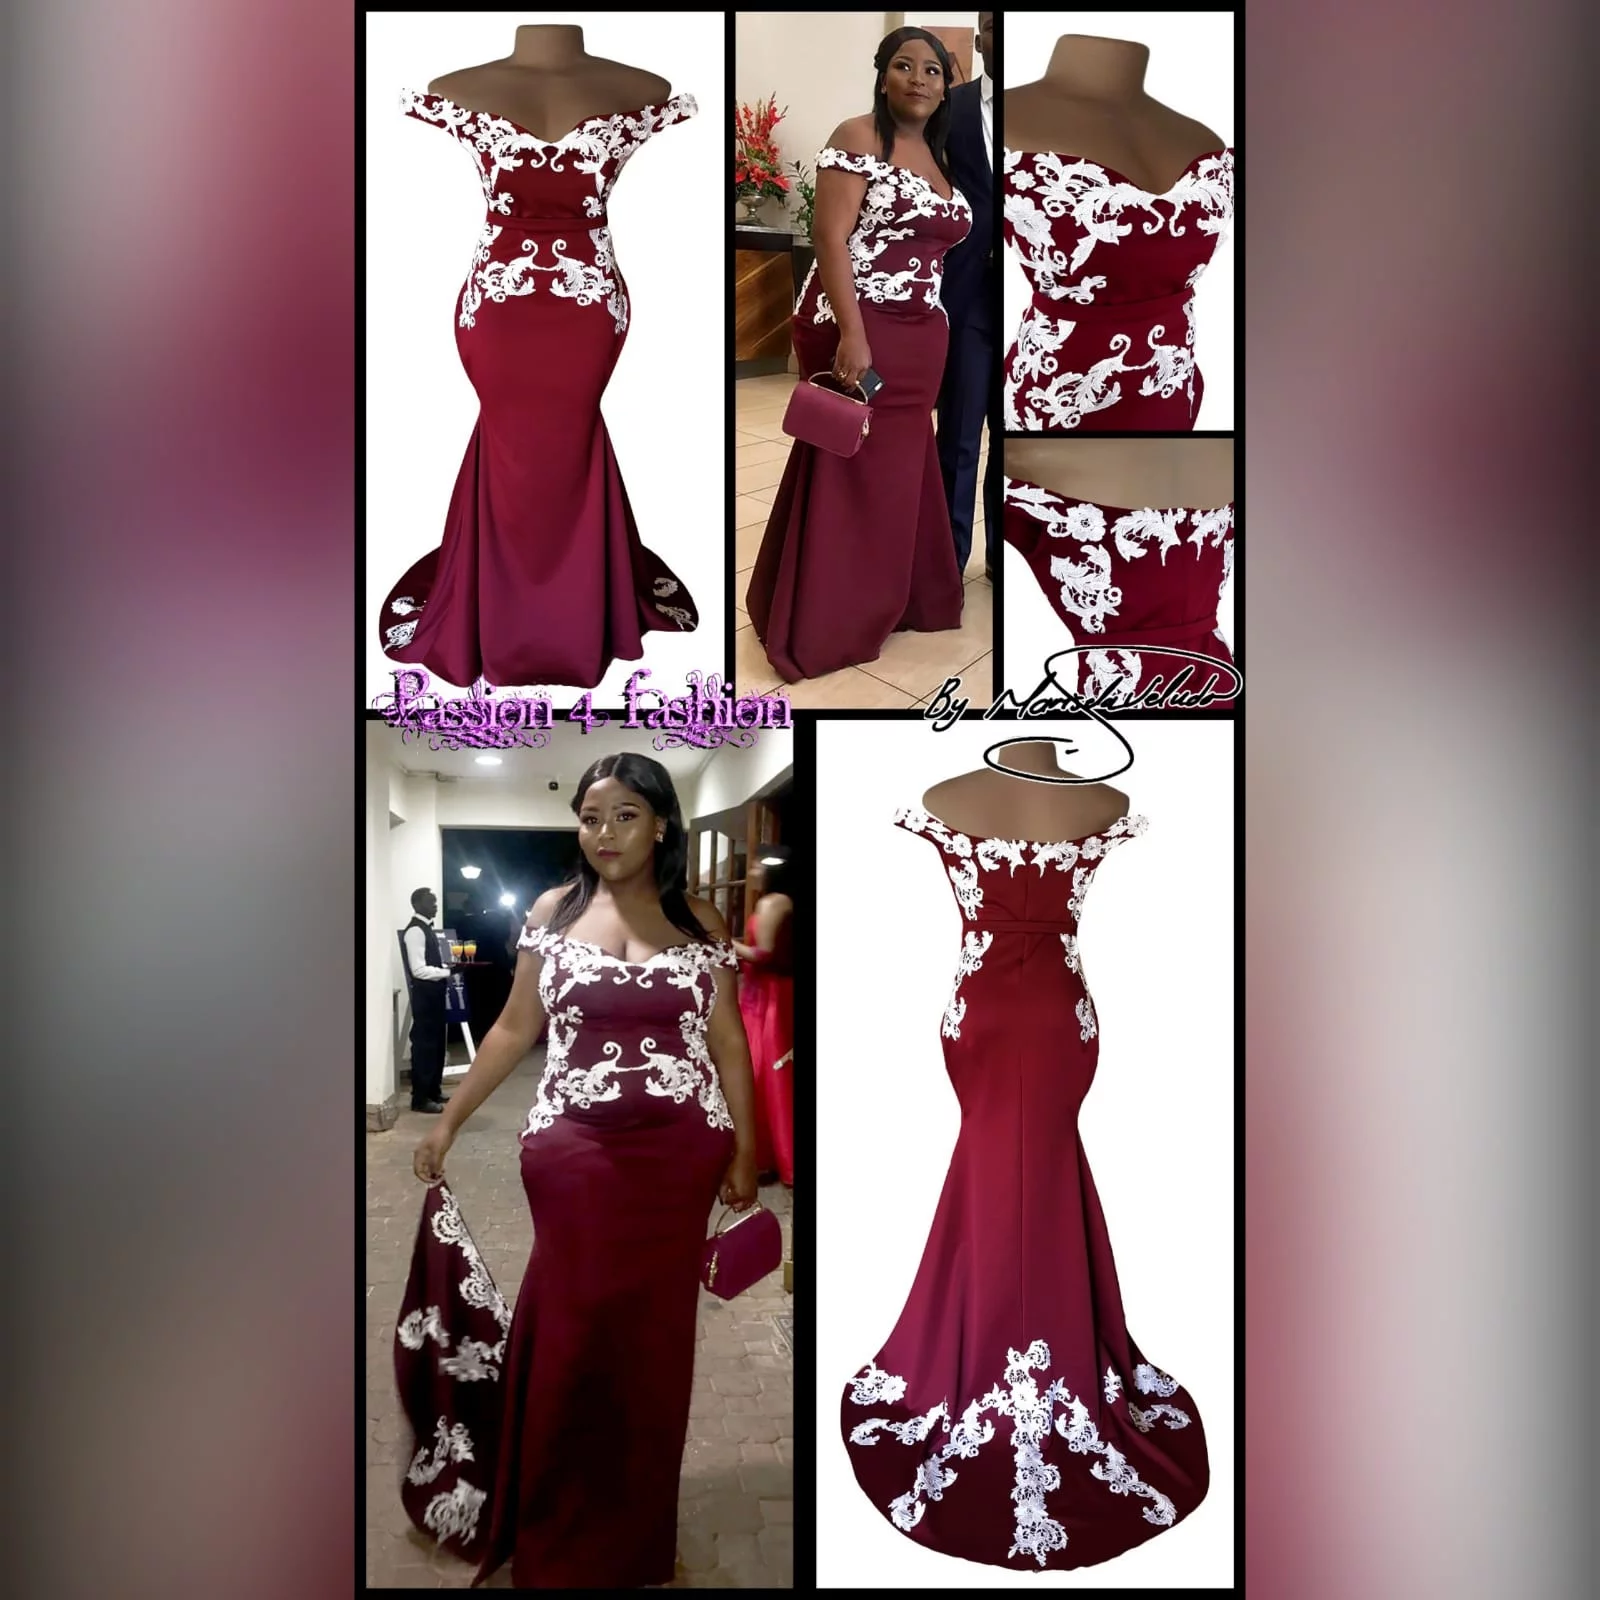 Maroon and white off shoulder soft mermaid prom dress 3 maroon and white off shoulder soft mermaid prom dress. With bodice, hips and train detailed with white lace.